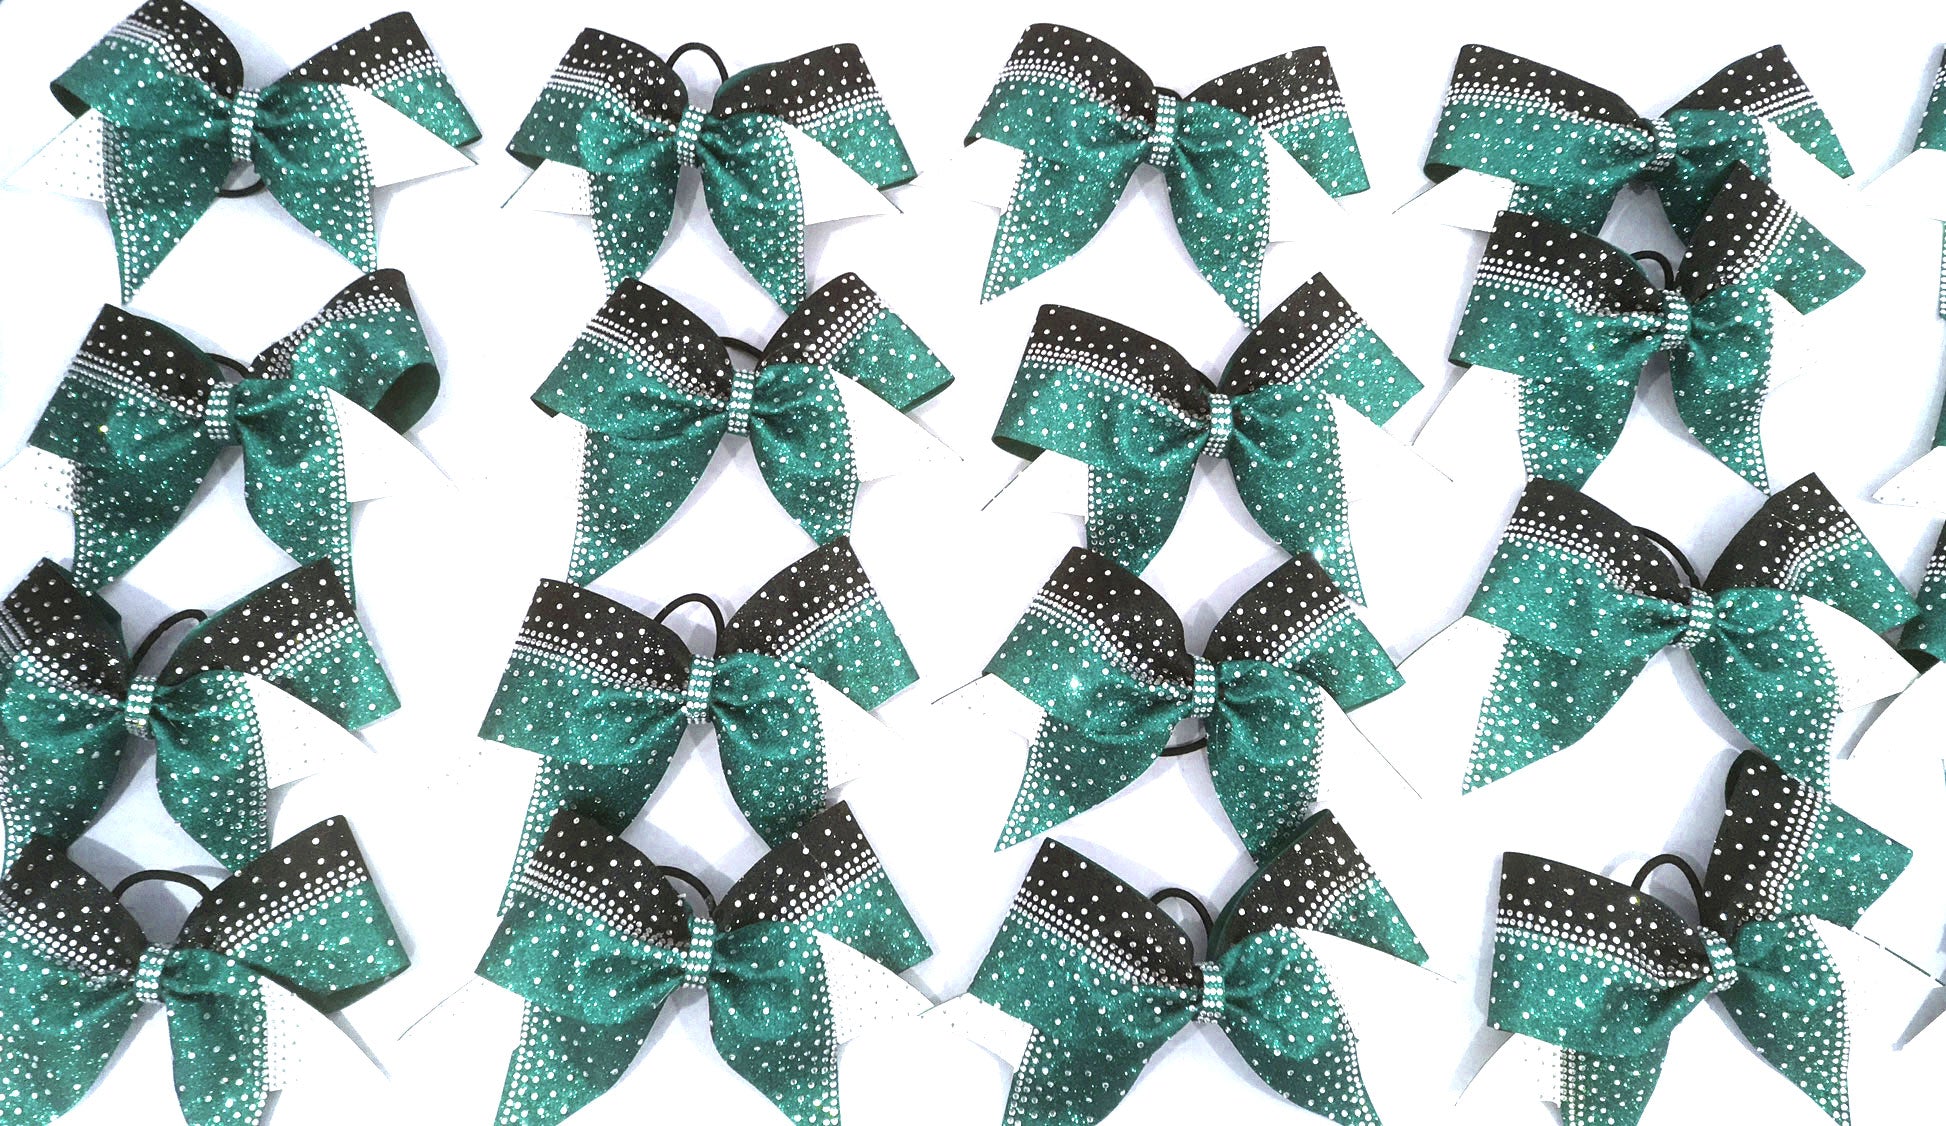 Teal and black cheerleading bow with crystal rhinestones, competition cheerleading bow, rhinestone bow